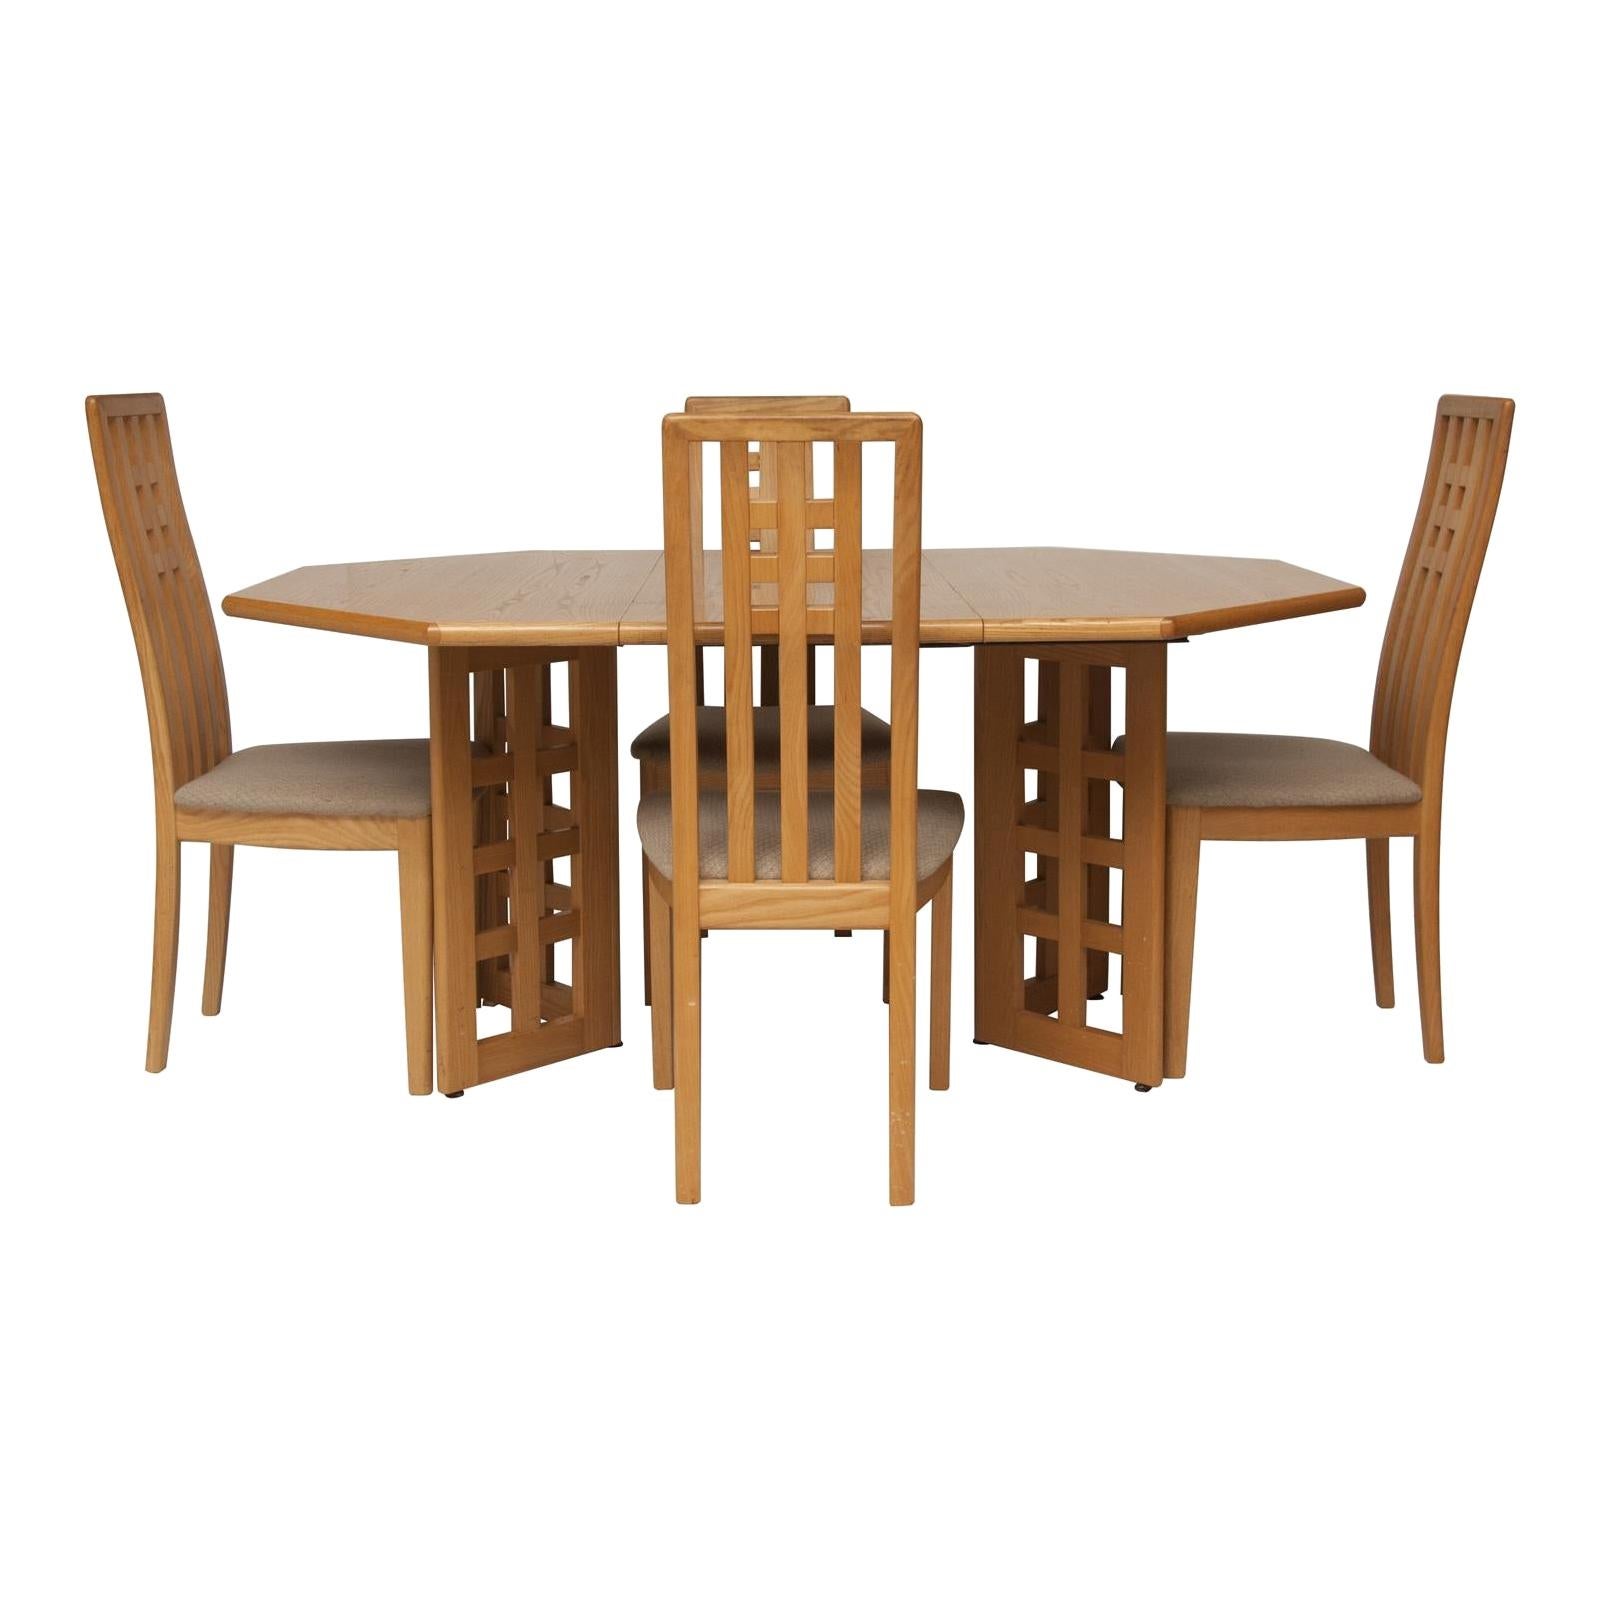 Solid Beech Extendable Dining Table & 4 Chairs, c.1960 For Sale